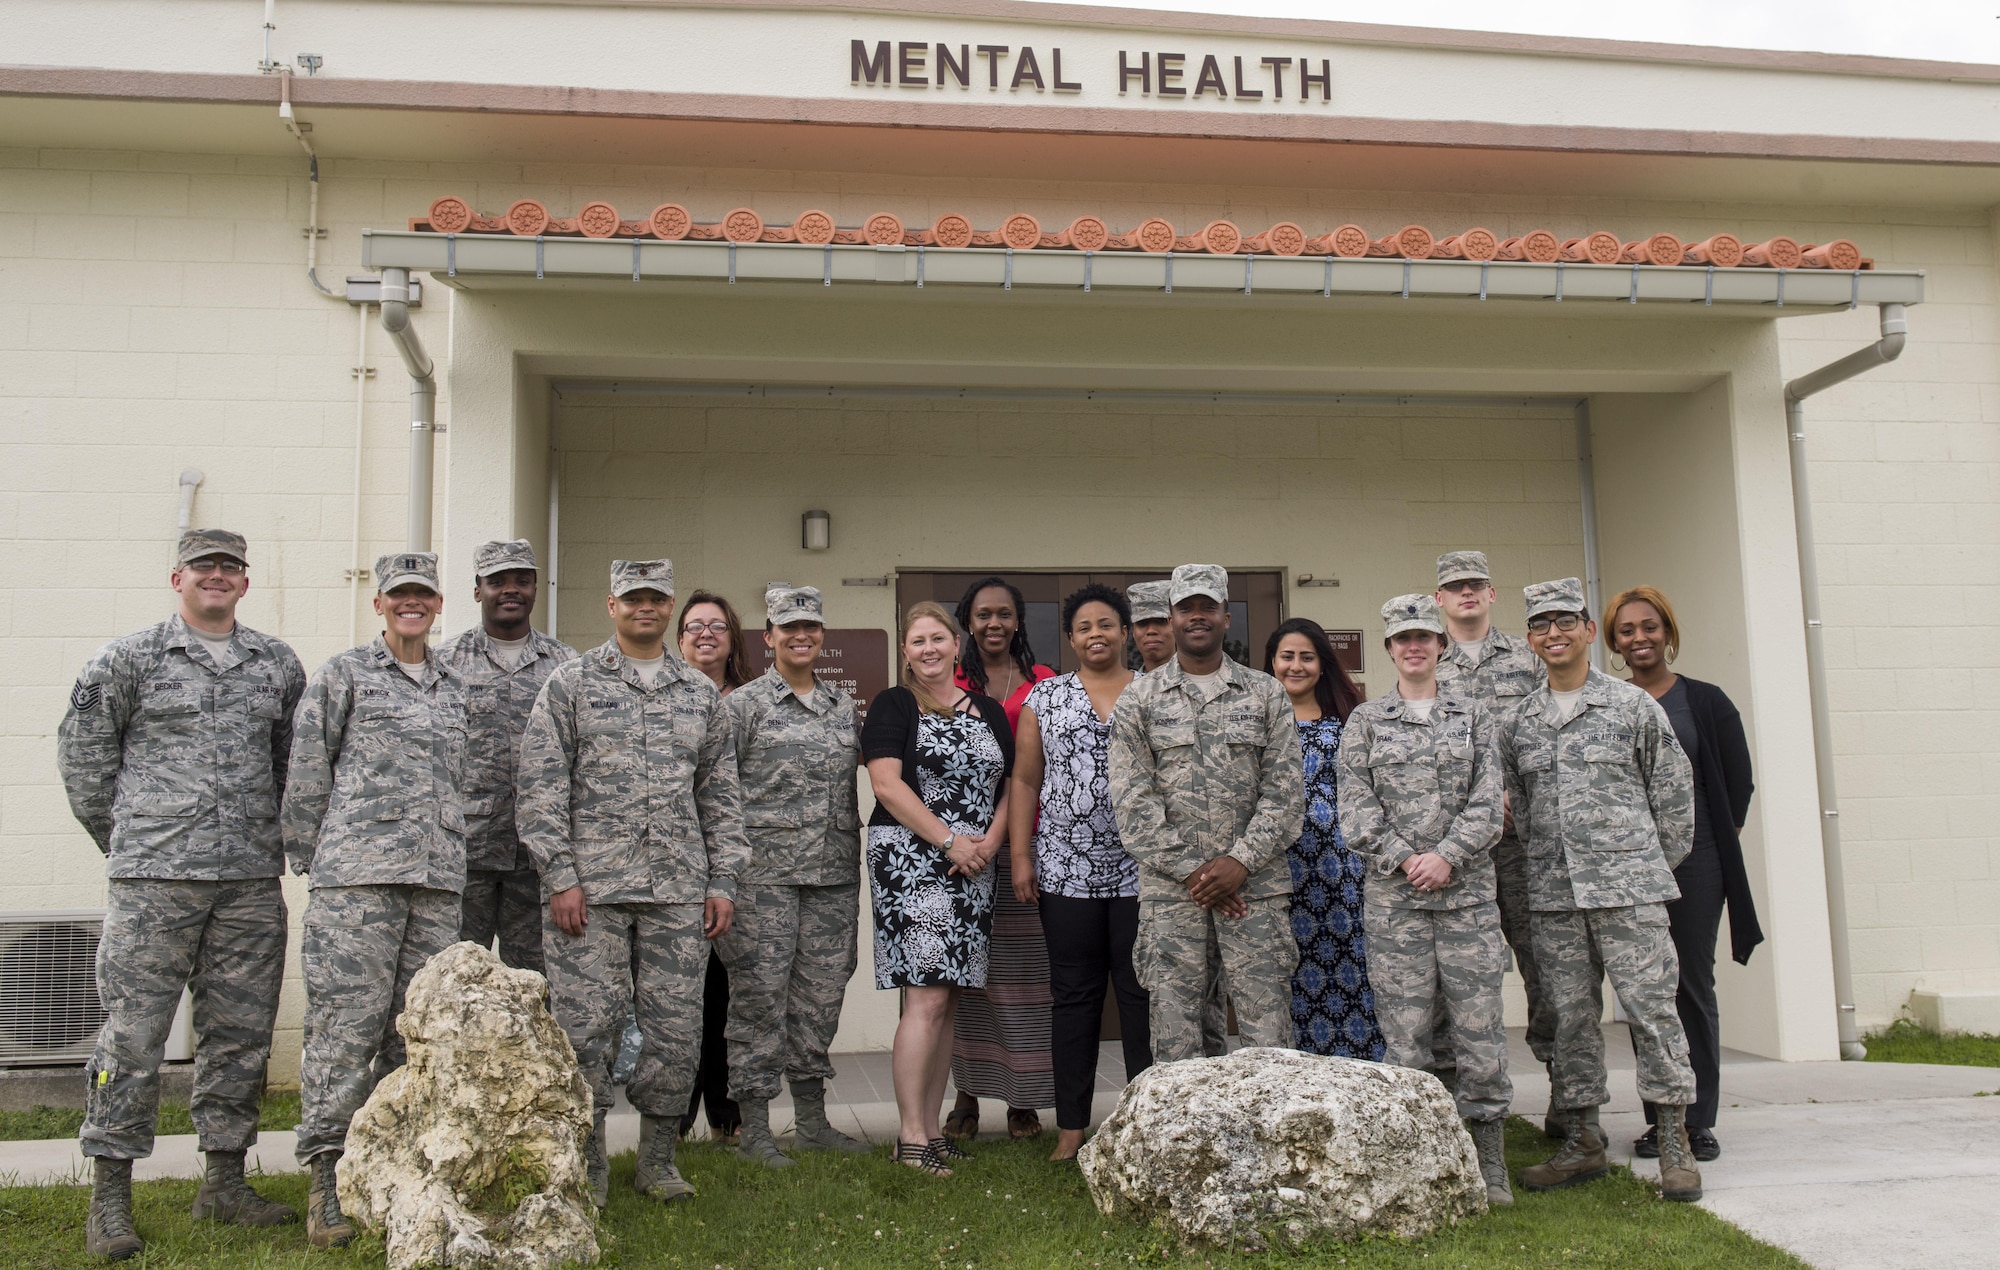 Mental health providers from the 18th Medical Operations Squadron stand for a group photo in front of the Kadena Mental Health Clinic June 26, 2017, at Kadena Air Base, Japan. The Kadena Mental Health Clinic serves the mental health needs of more than 16,000 joint service beneficiaries, including U.S. military service members, veterans, and their families. (U.S. Air Force photo by Senior Airman Omari Bernard)